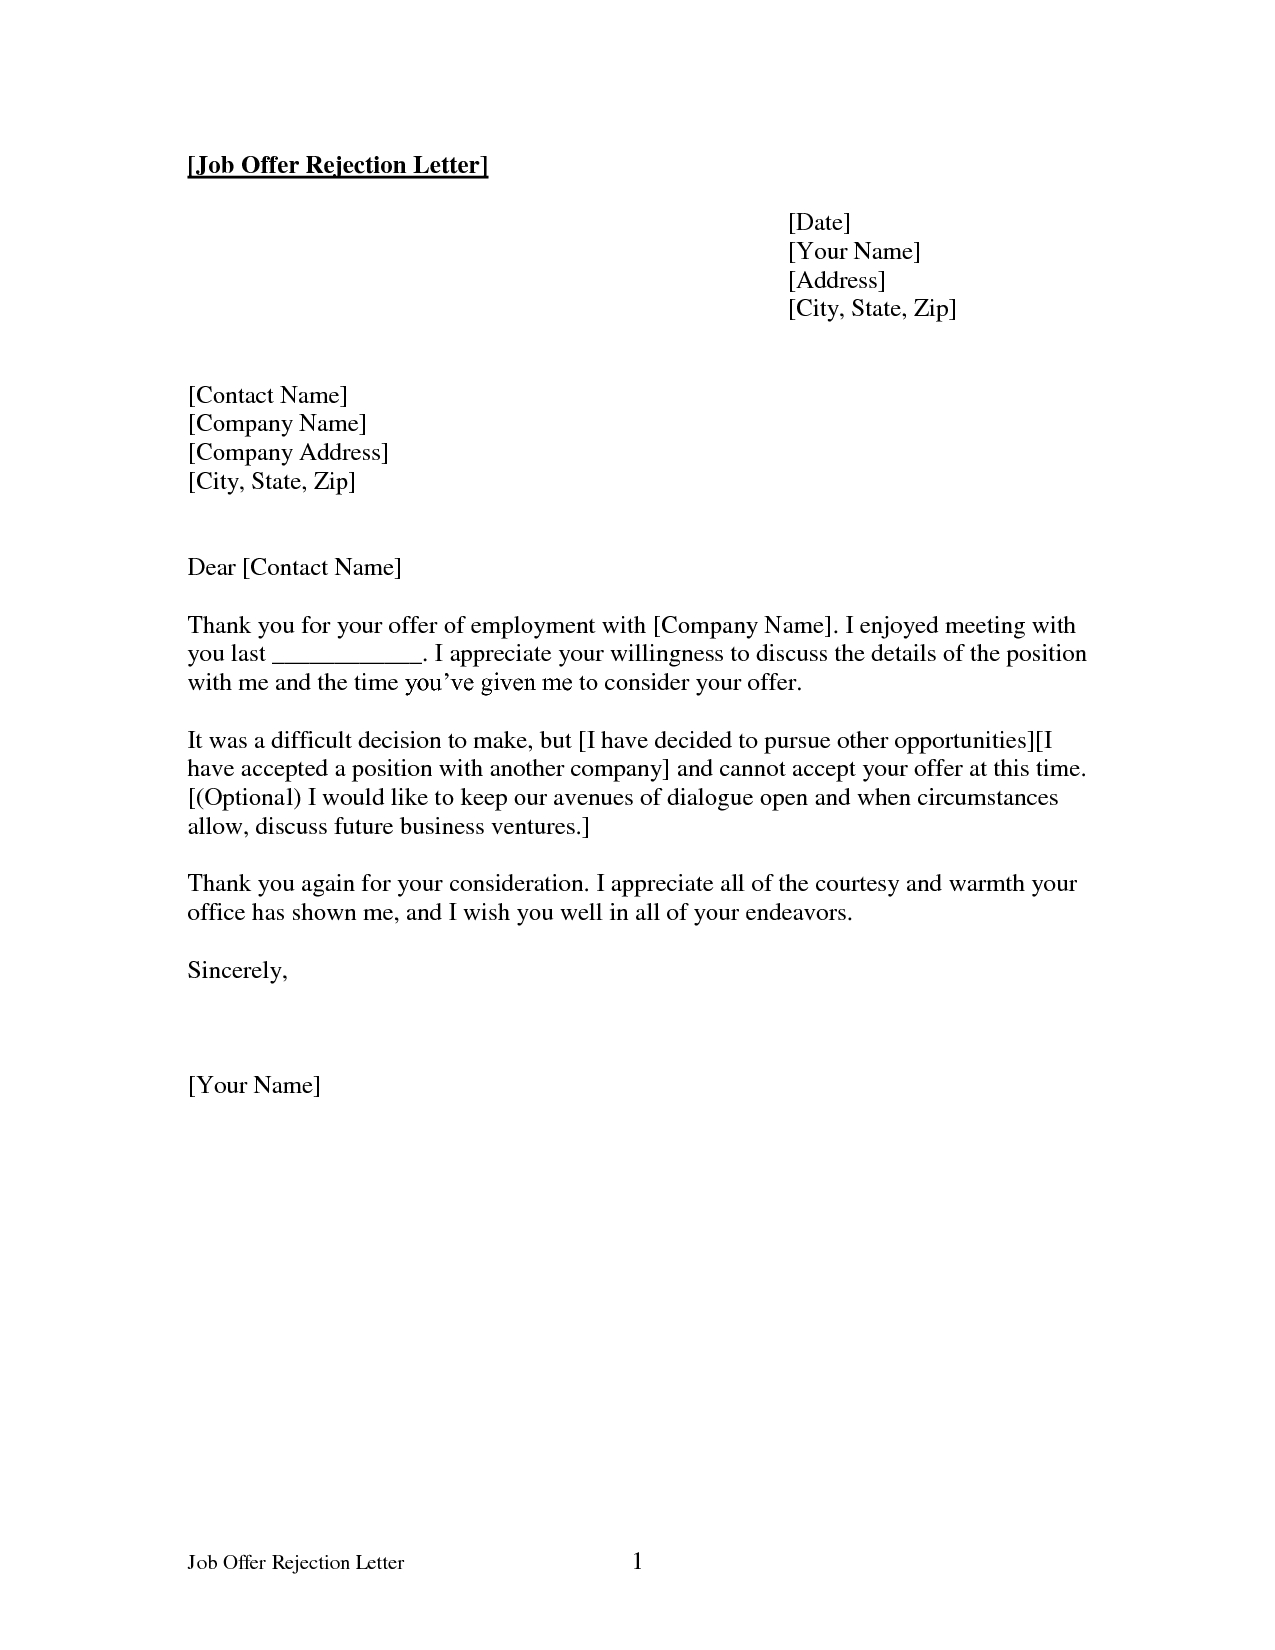 job offer decline letter template example-Internship Decline Letter example of Declining Letter incase that u have been offered by two or more hotel pany to do your internship 16-a